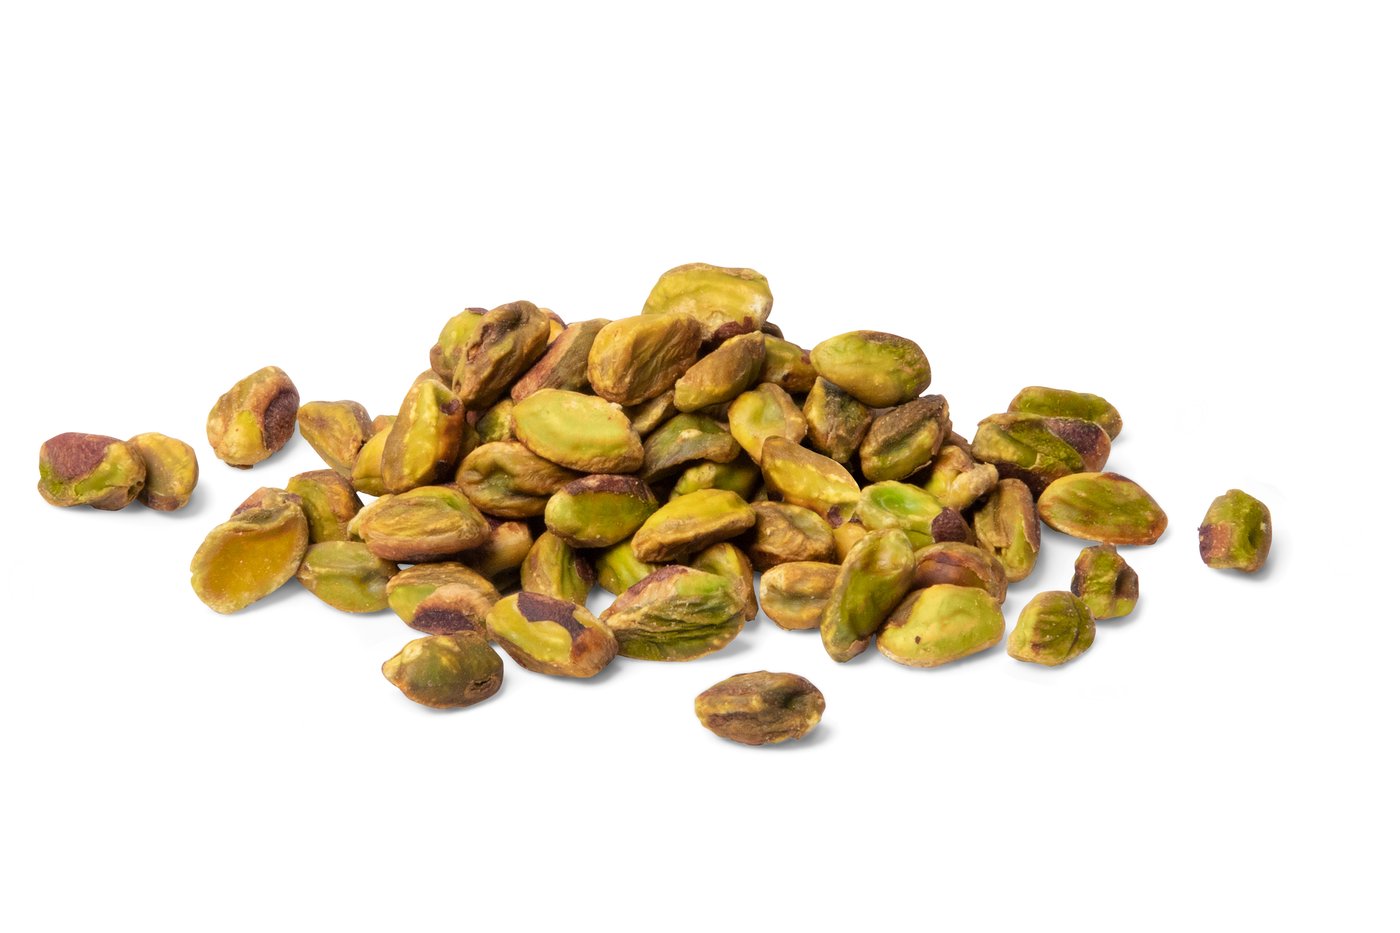 Roasted Pistachios (Unsalted, No Shell) photo